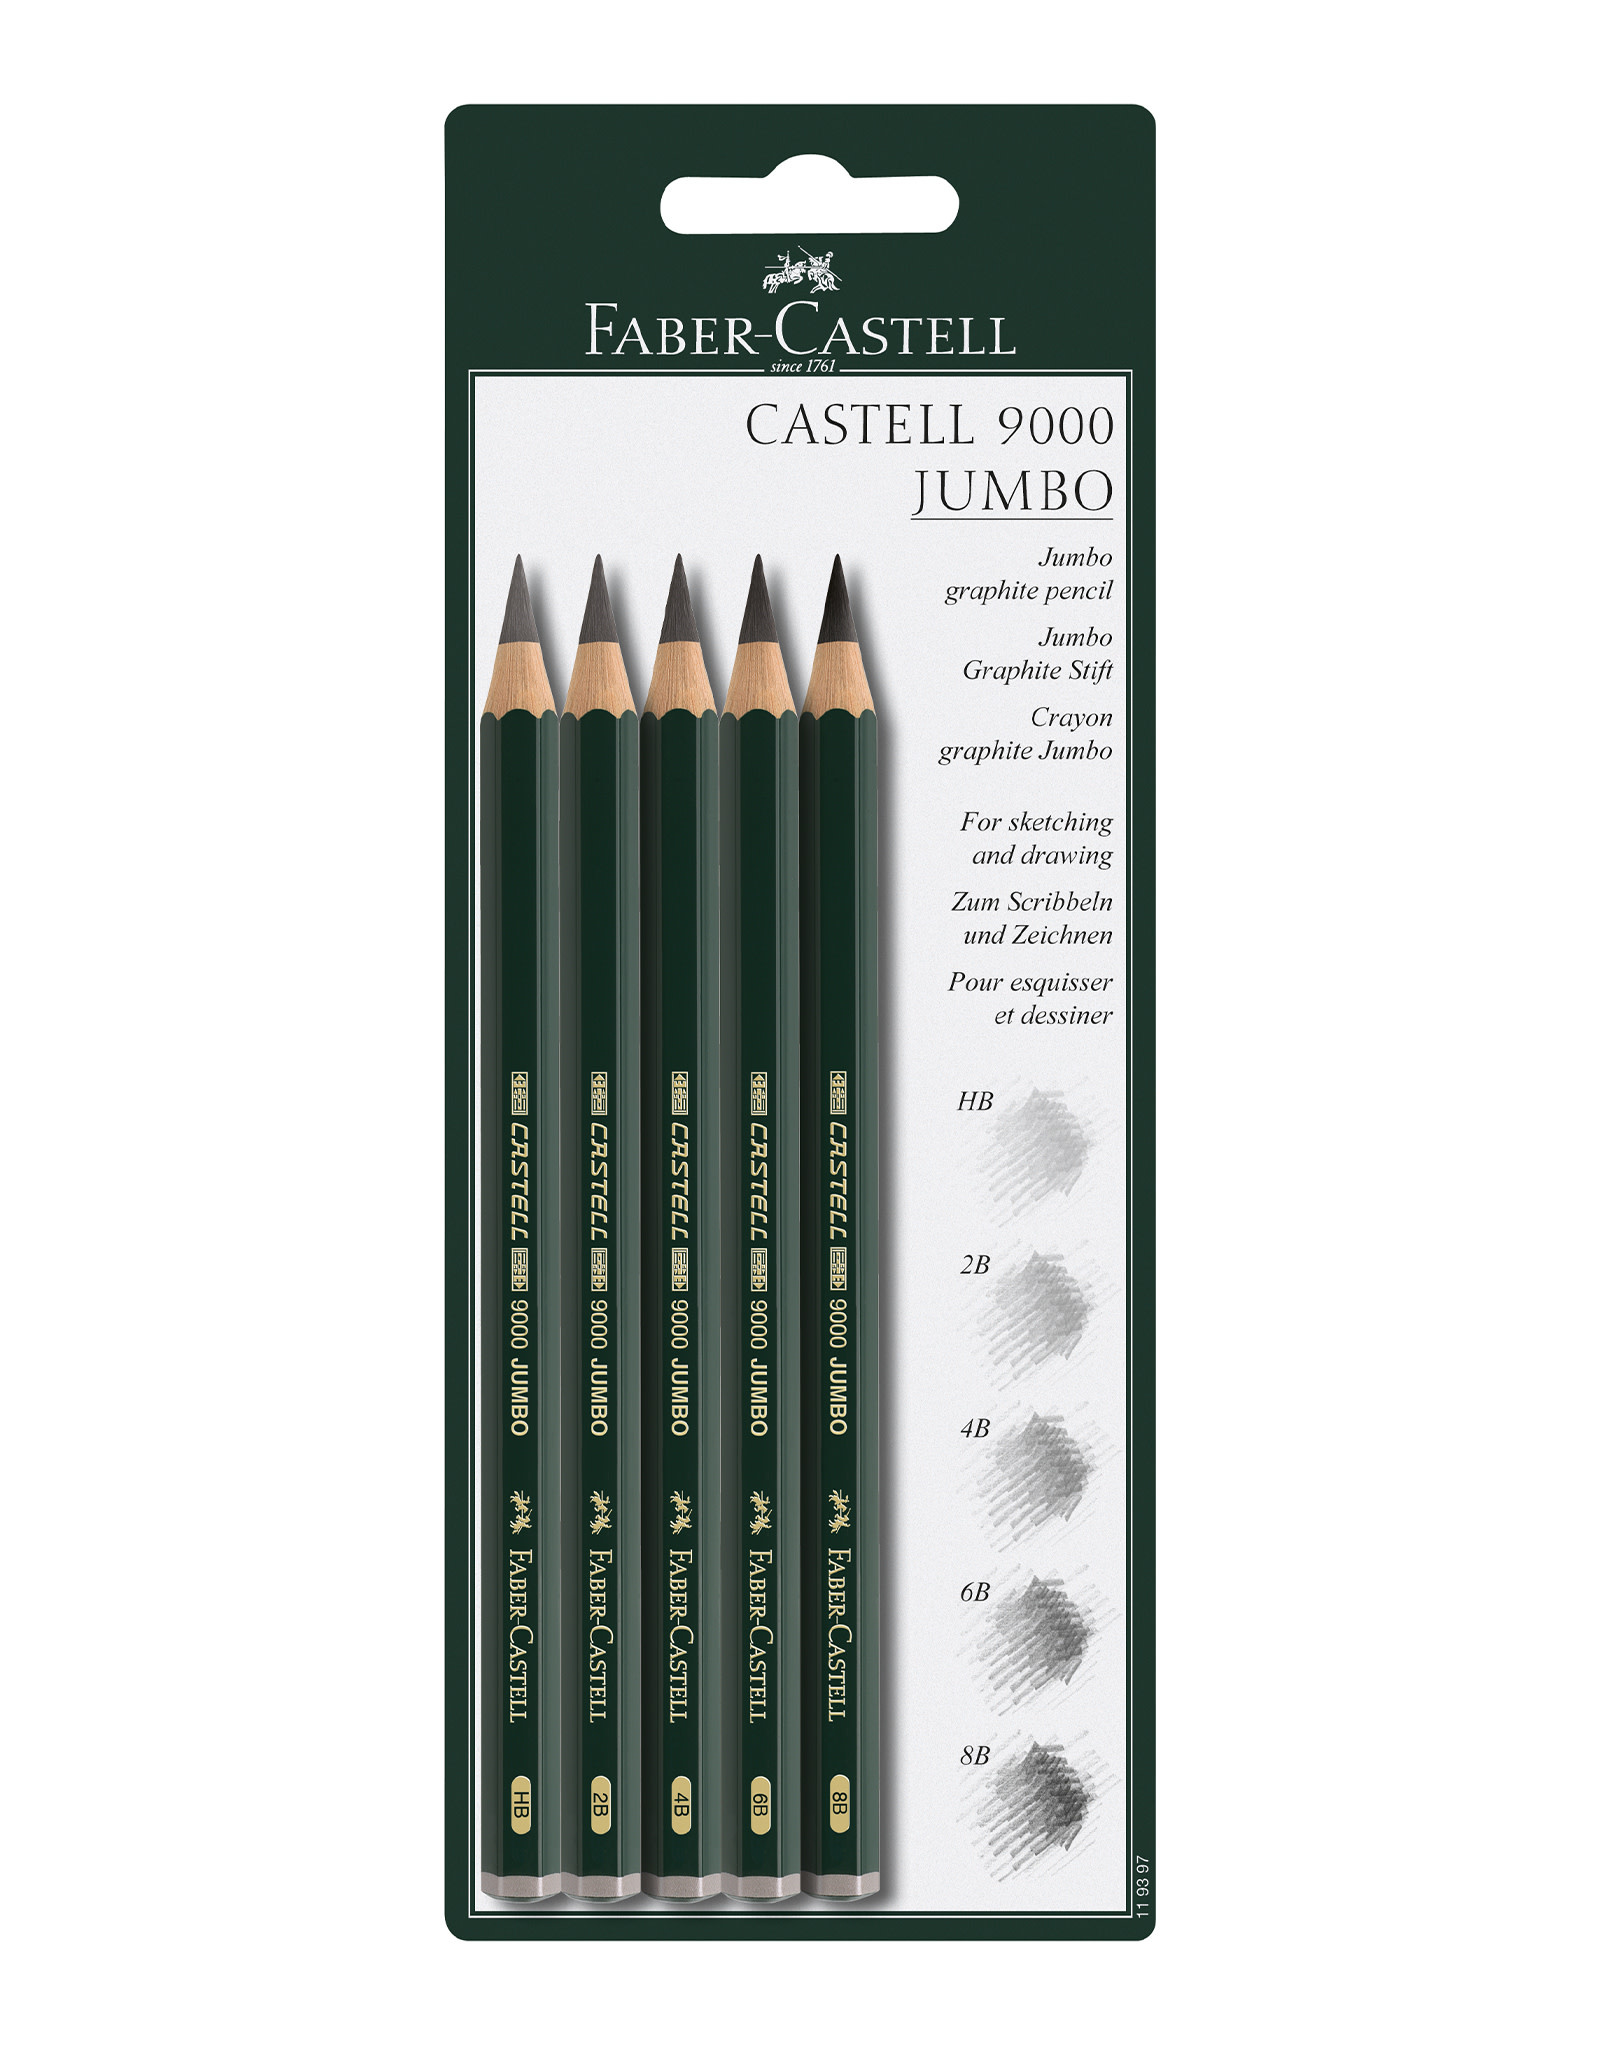  Faber-Castell Graphite Aquarelle Water-Soluble Single Pencil,  Hb : Artists Pencils : Office Products